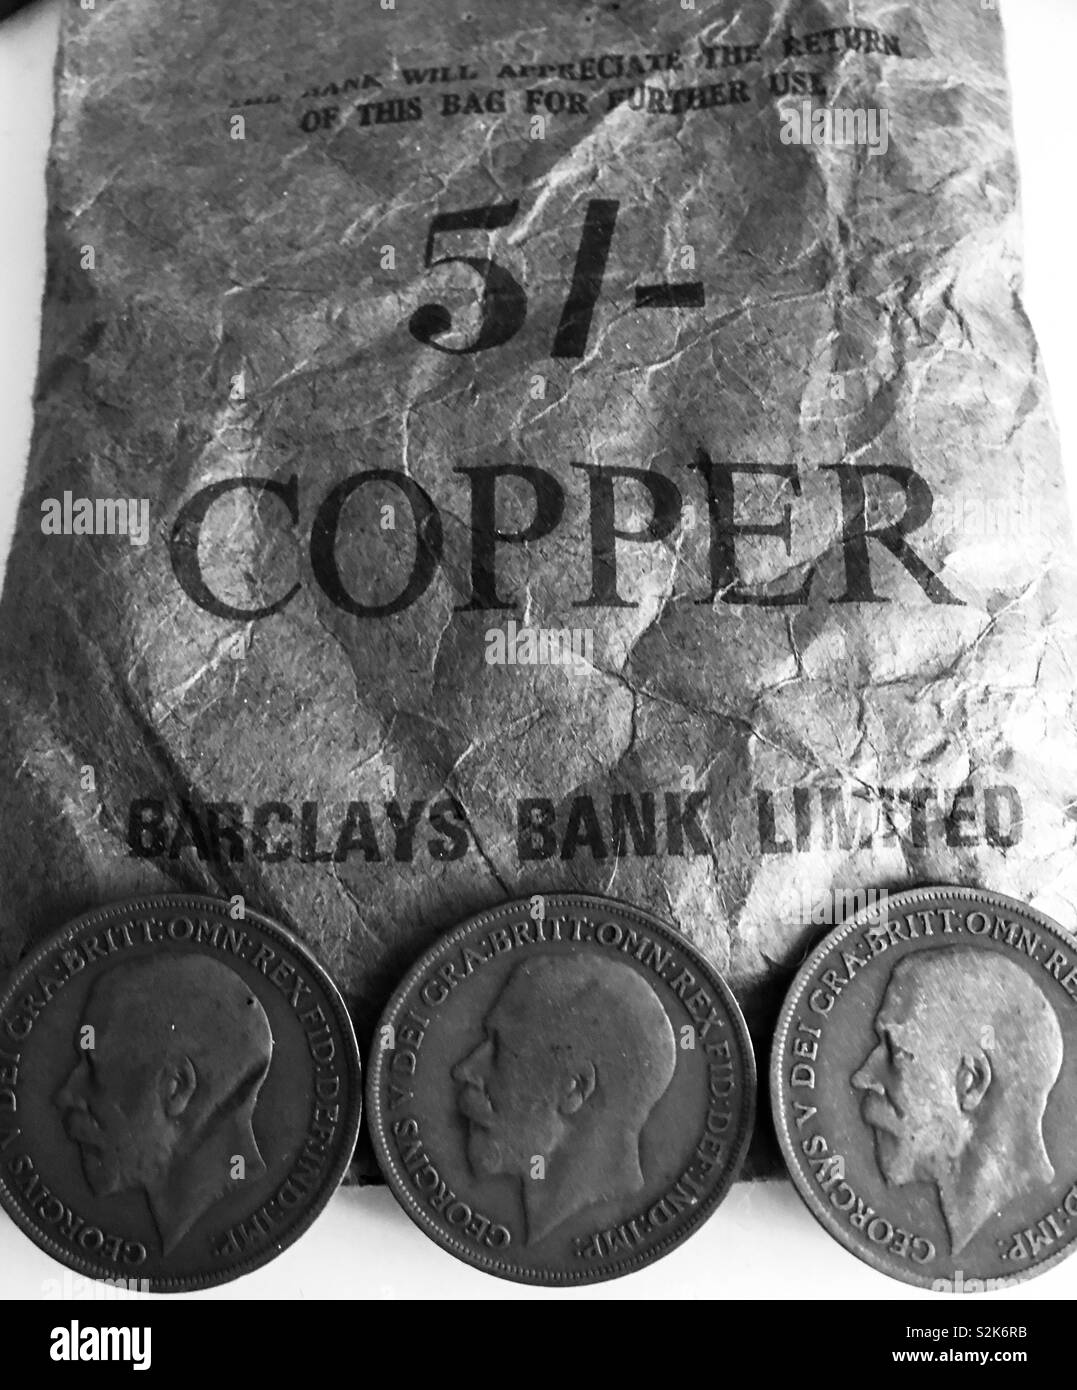 Old George V Penny coins on a paper bank bag for copper coins Stock Photo